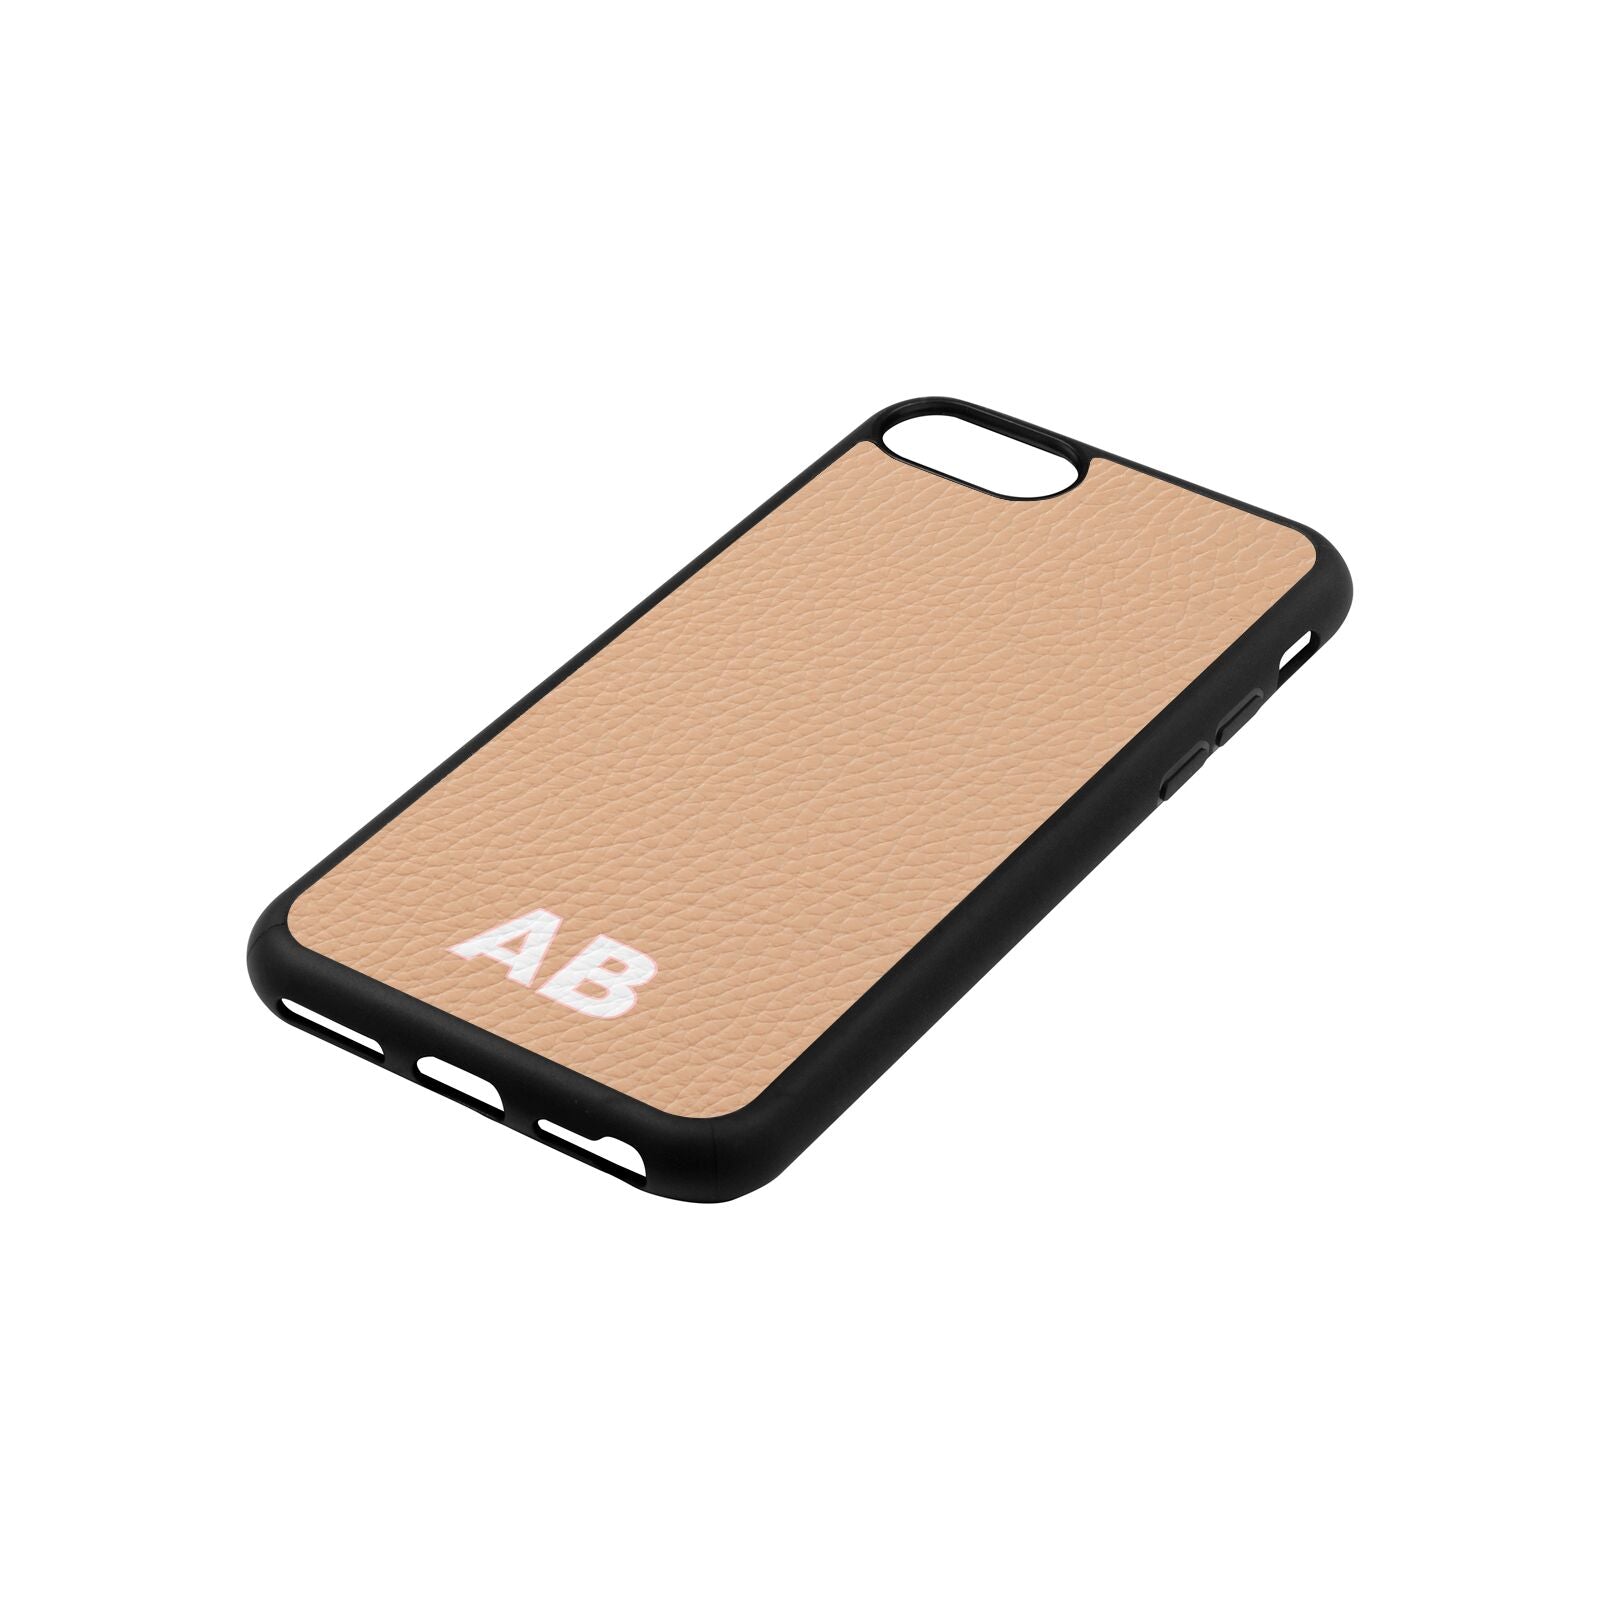 Sans Serif Initials Nude Pebble Leather iPhone 8 Case Side Angle